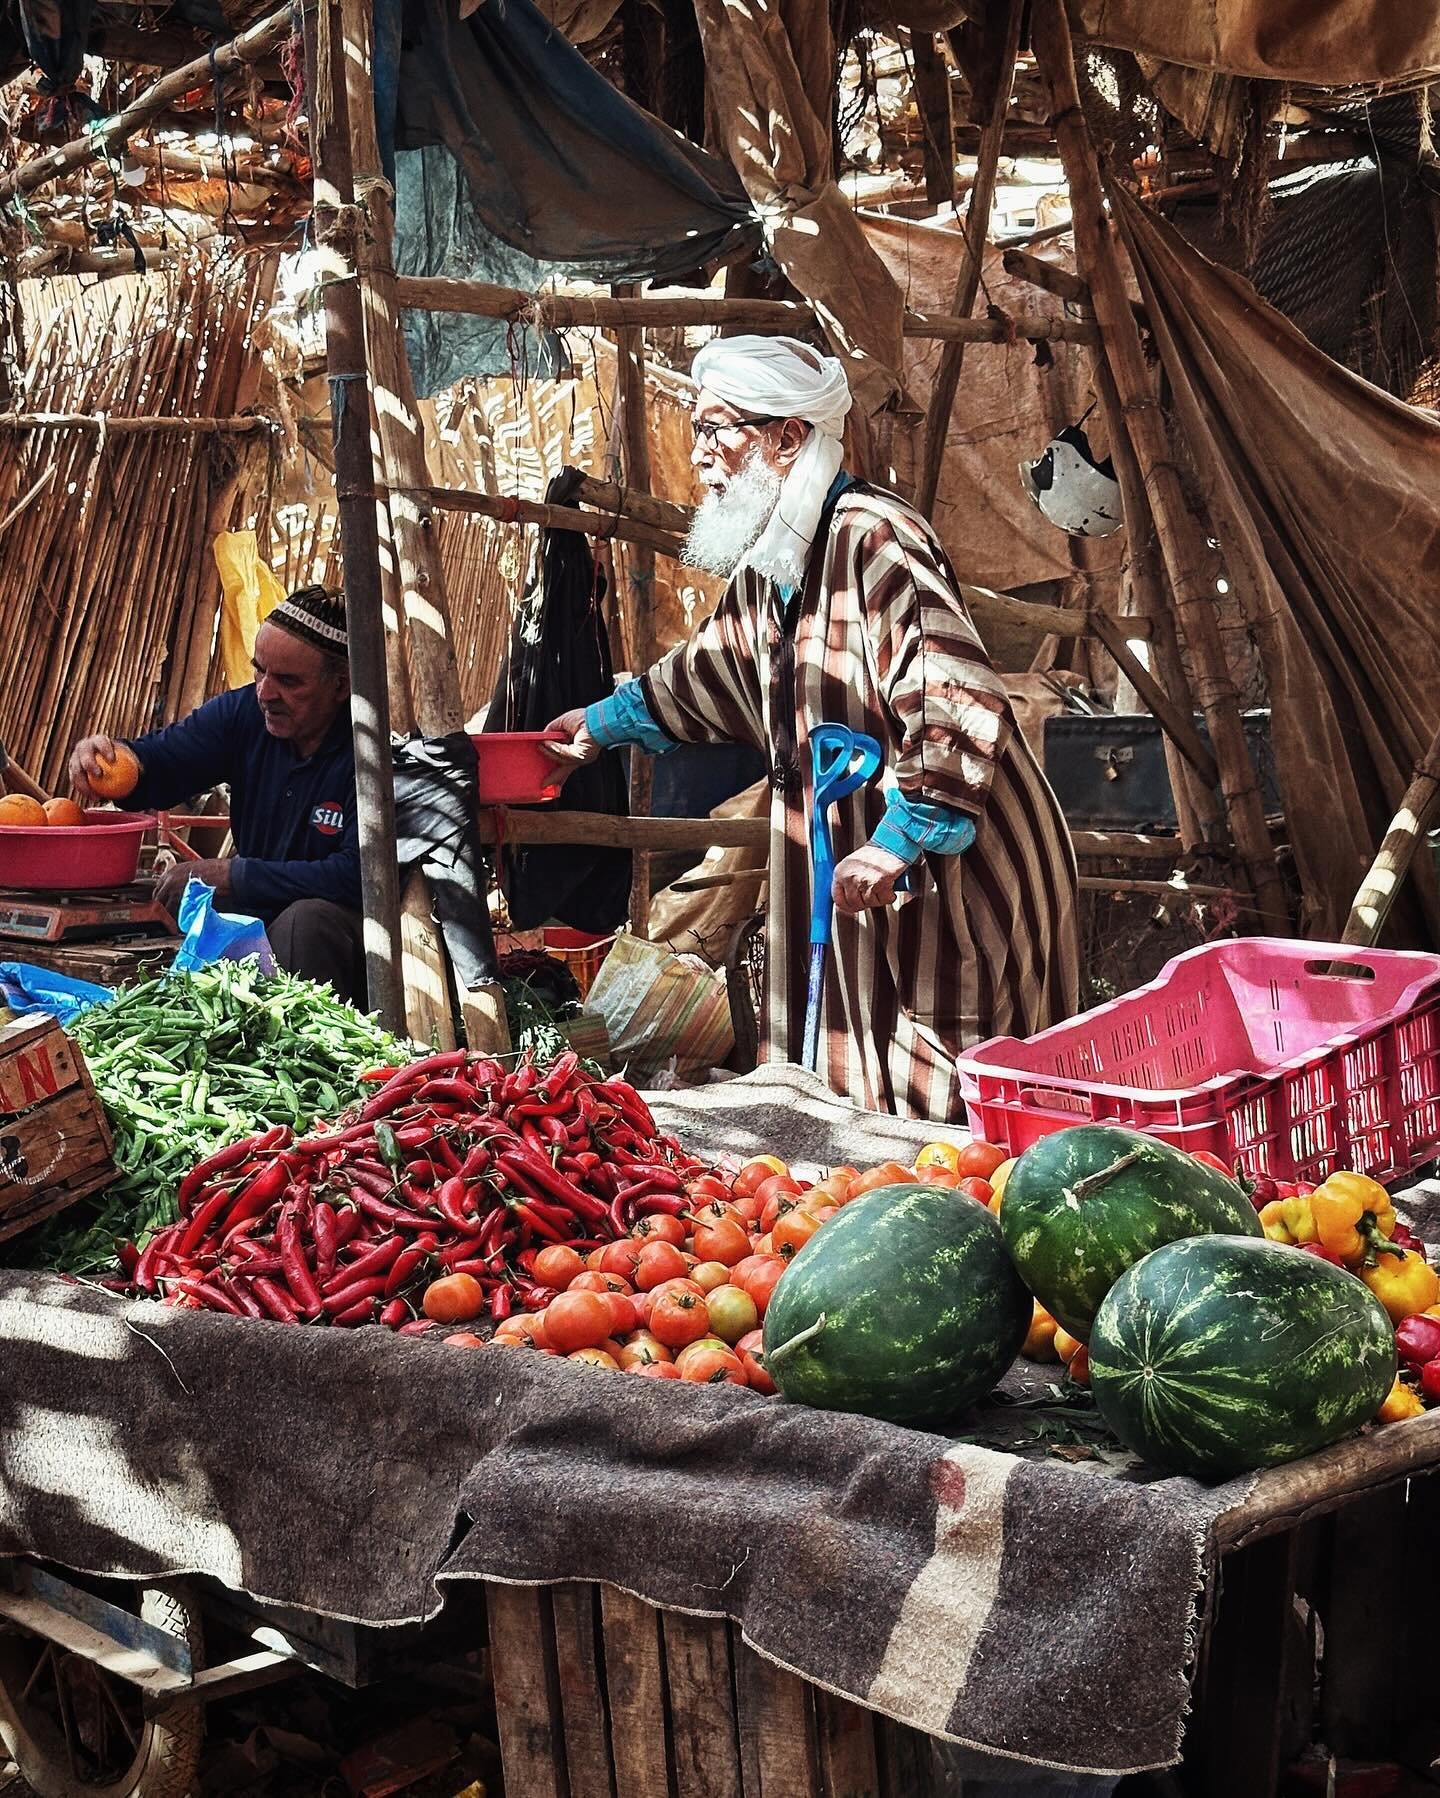 A market we stopped at on the journey out of the Sahara to Fes.
.
.
.
.
.
#moroccotravel #portraits #dayinthelifephotography #travelewriters #travelphotography #travelling